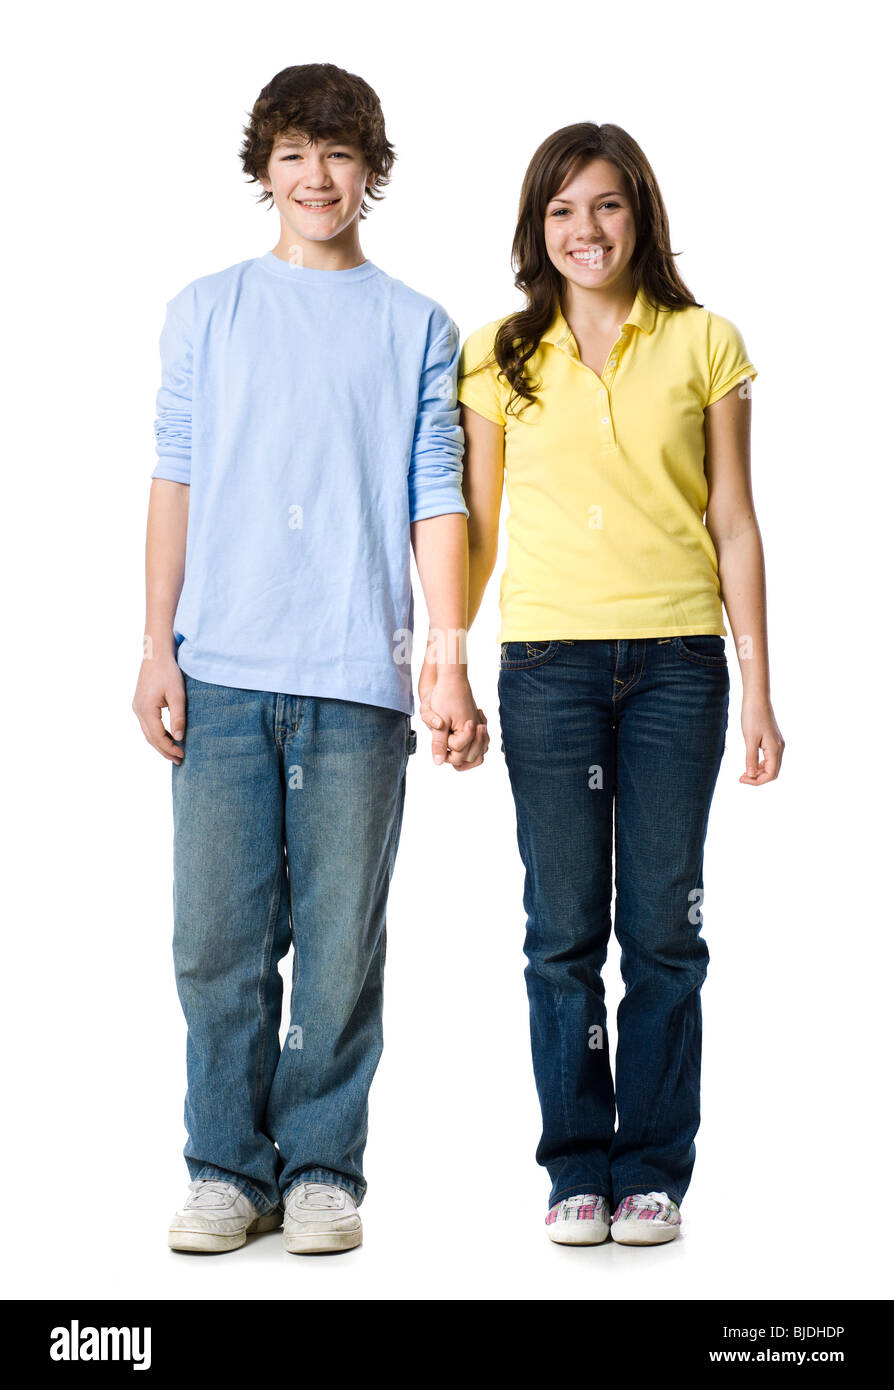 young couple holding hands Stock Photo